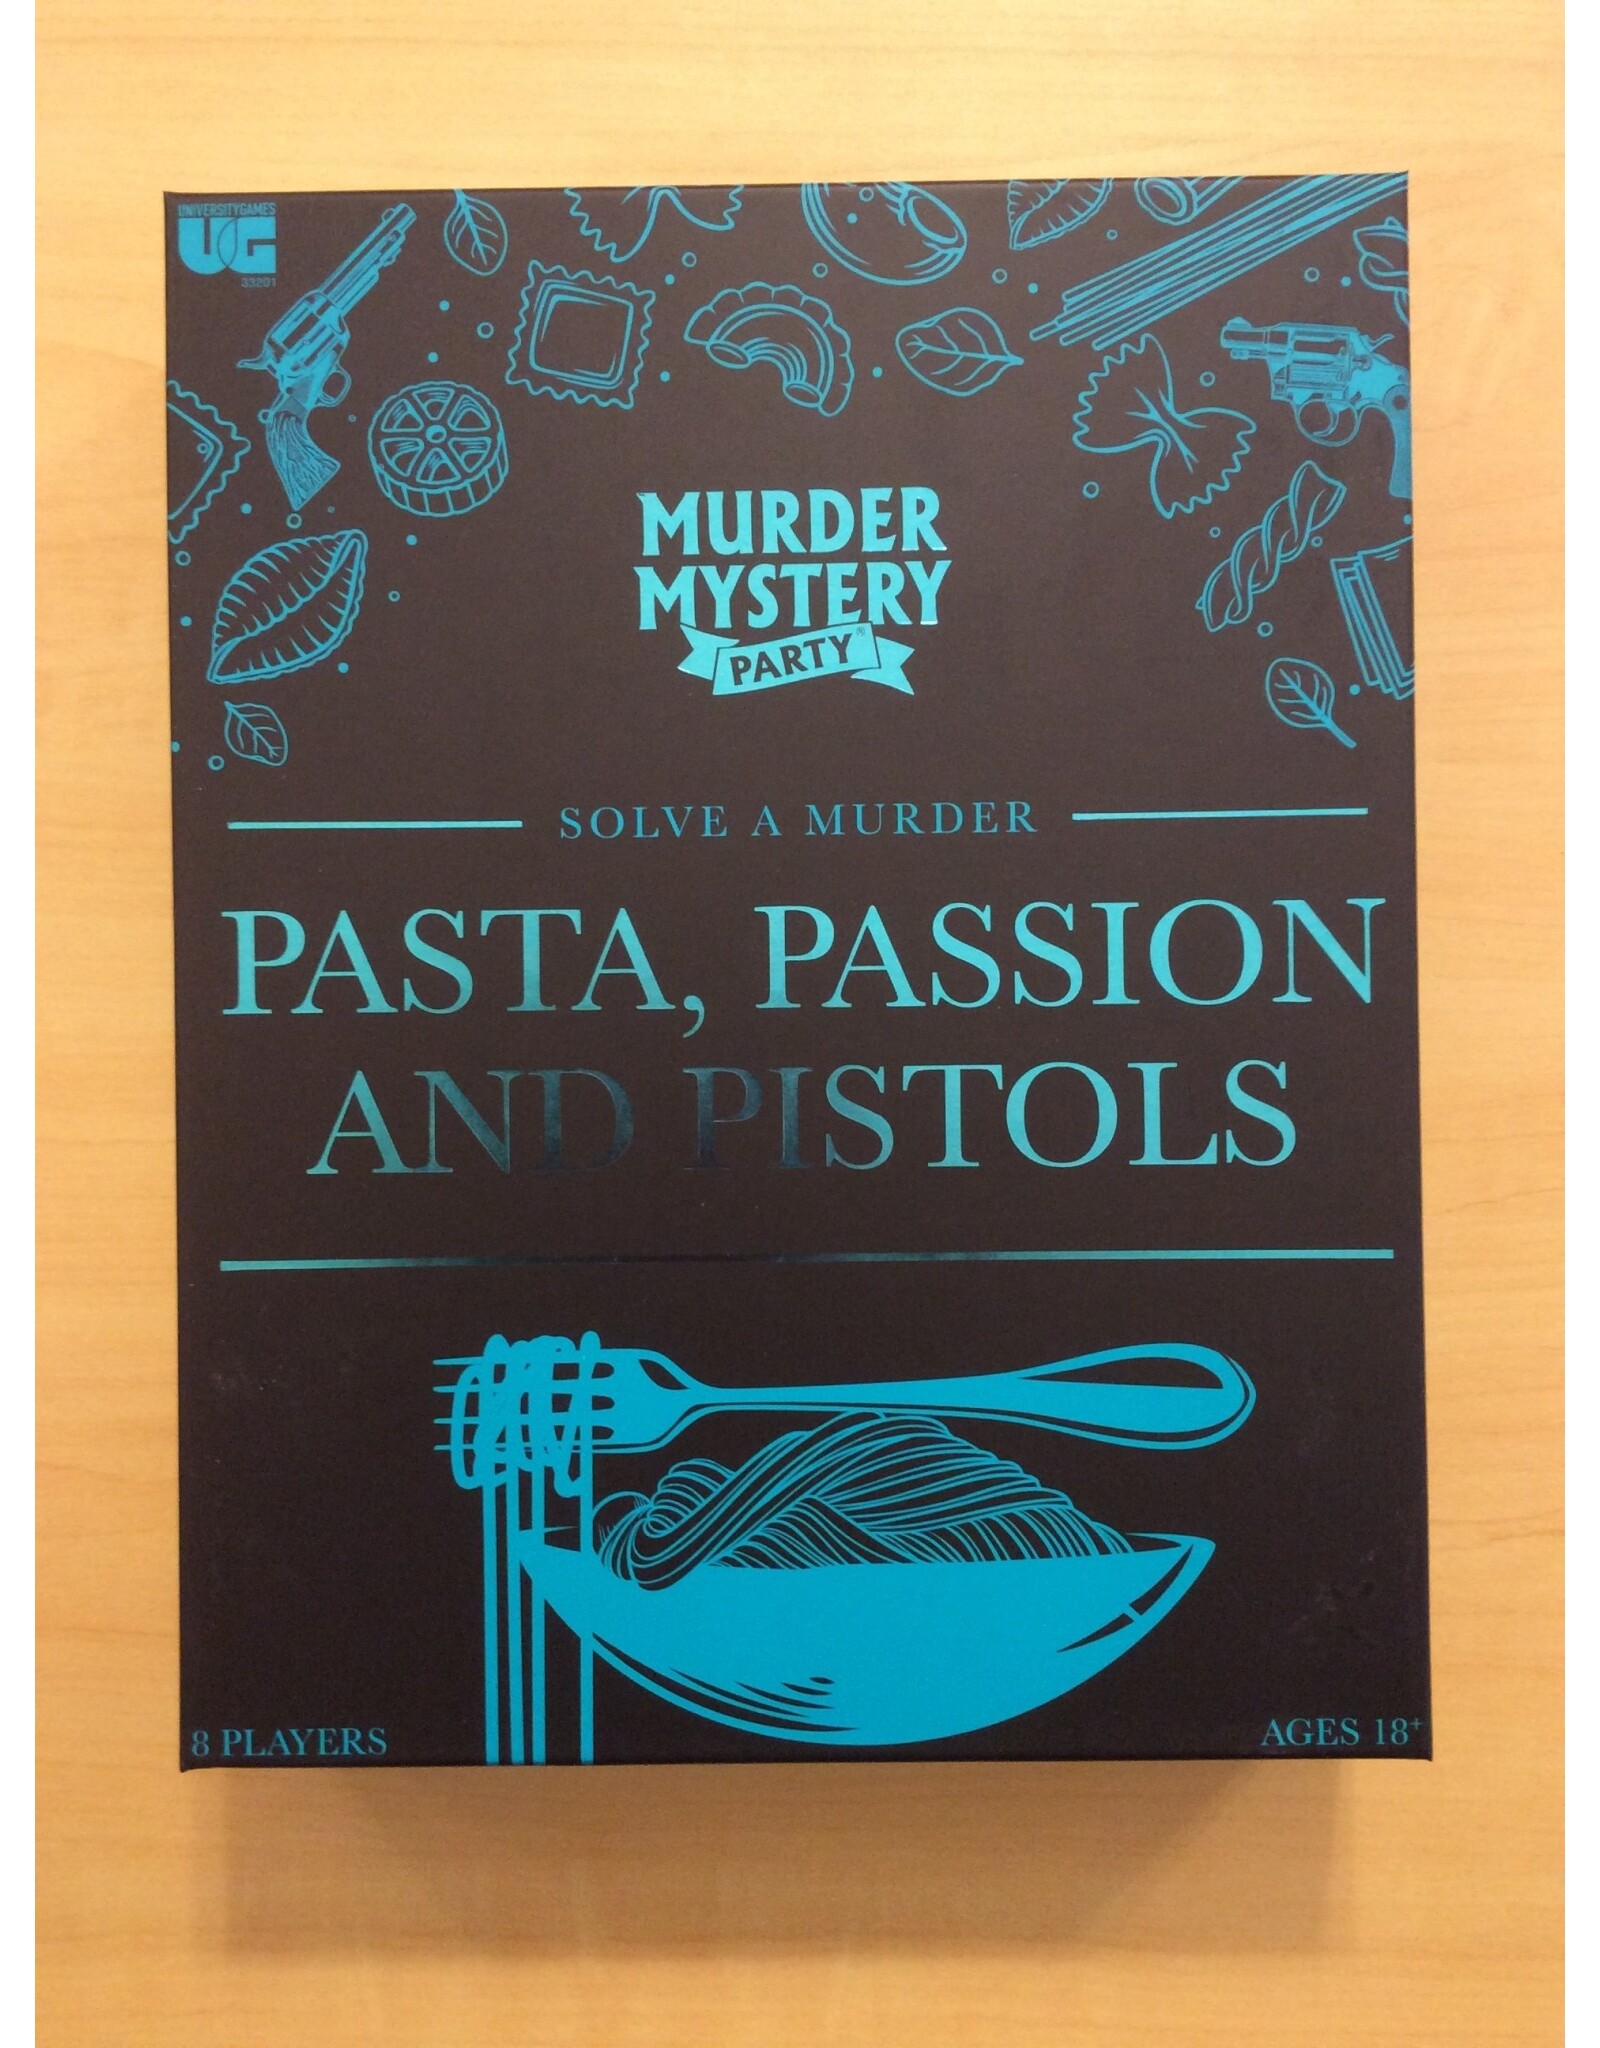 University Games Murder Mystery Party : Pasta, Passion & Pistols